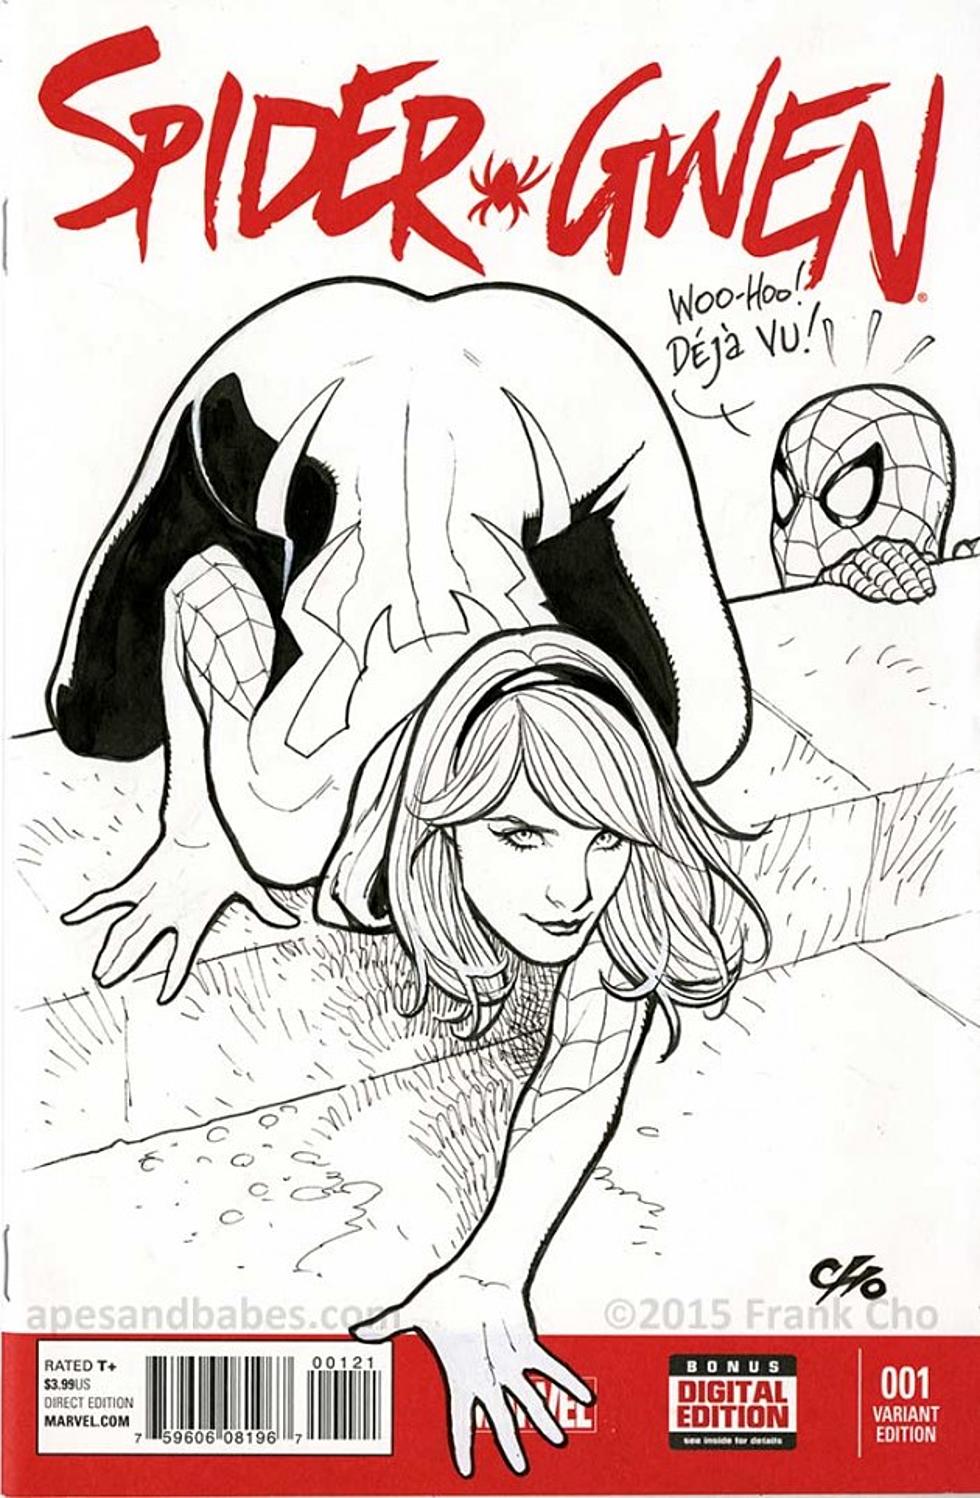 Outrage and Complacency: Responses to Frank Cho&#8217;s Spider-Gwen Cover